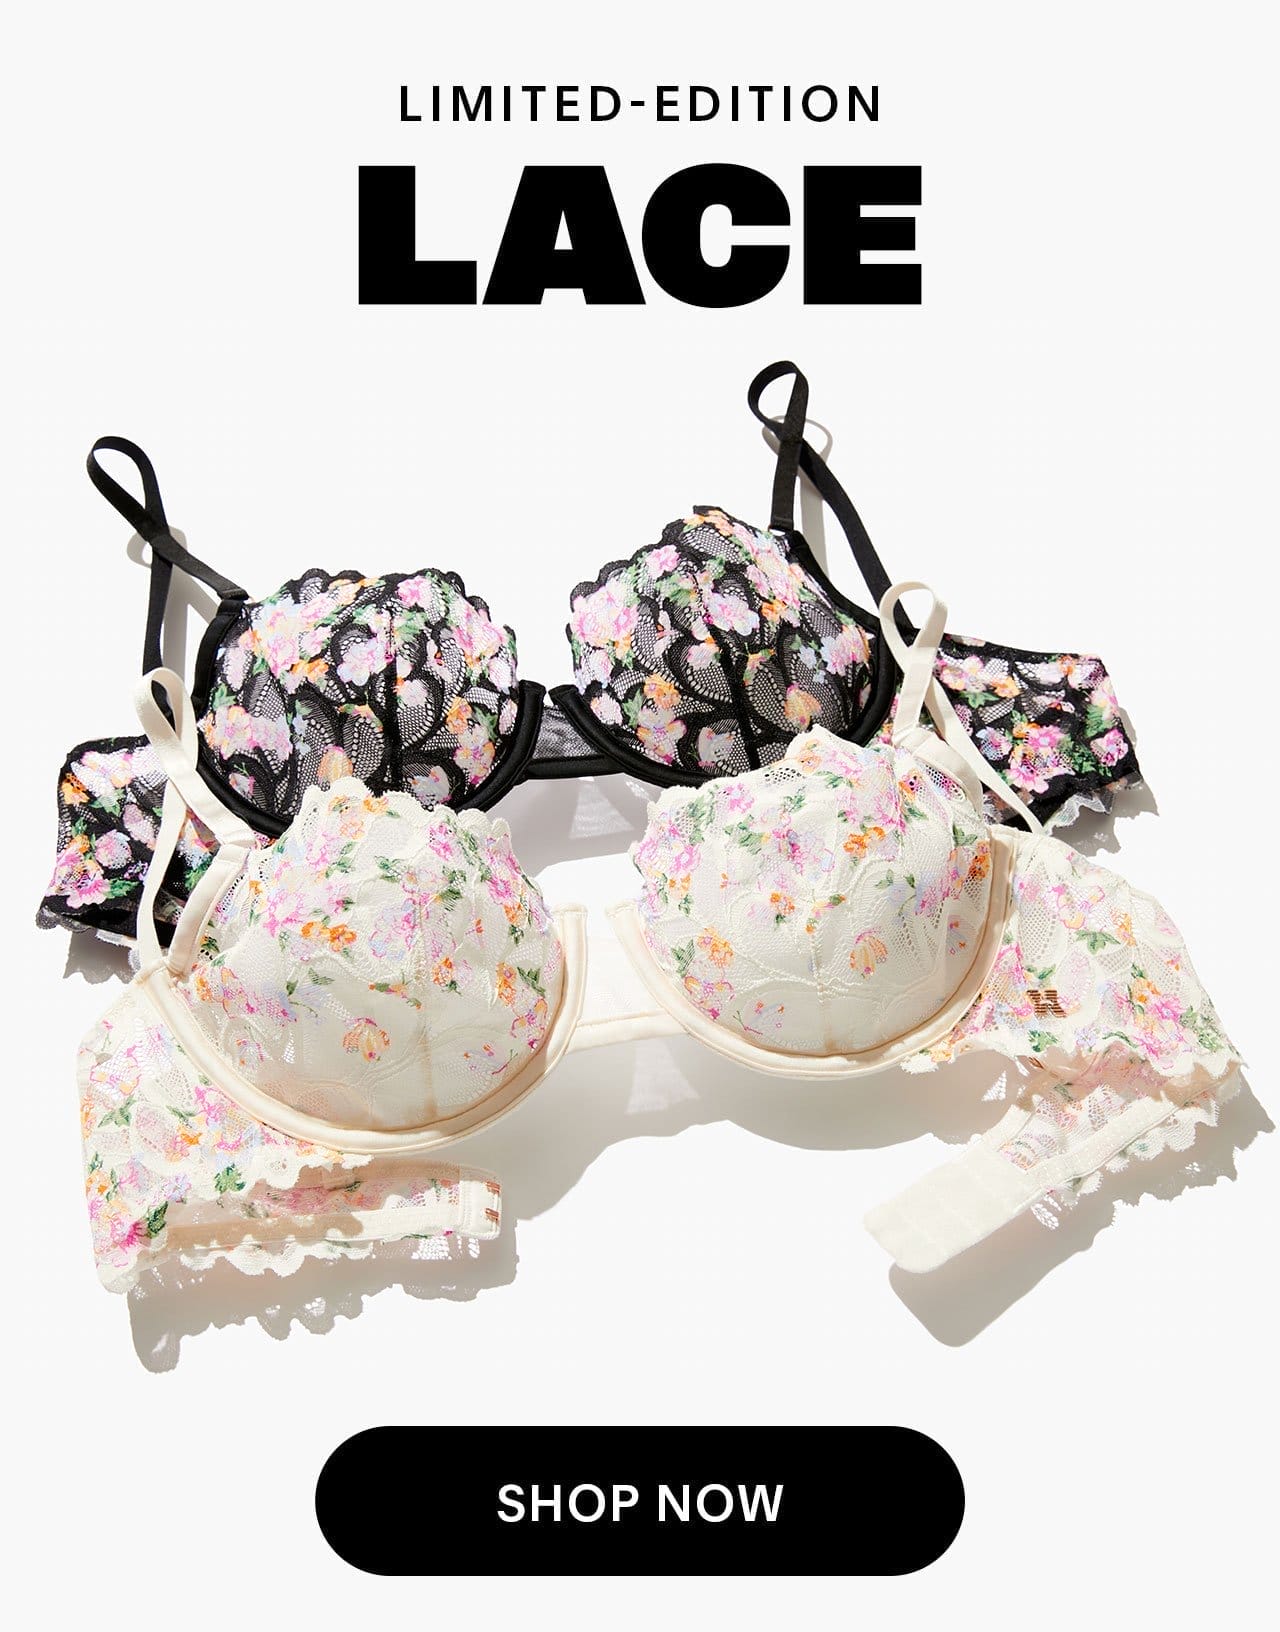 Limited-Edition Lace 